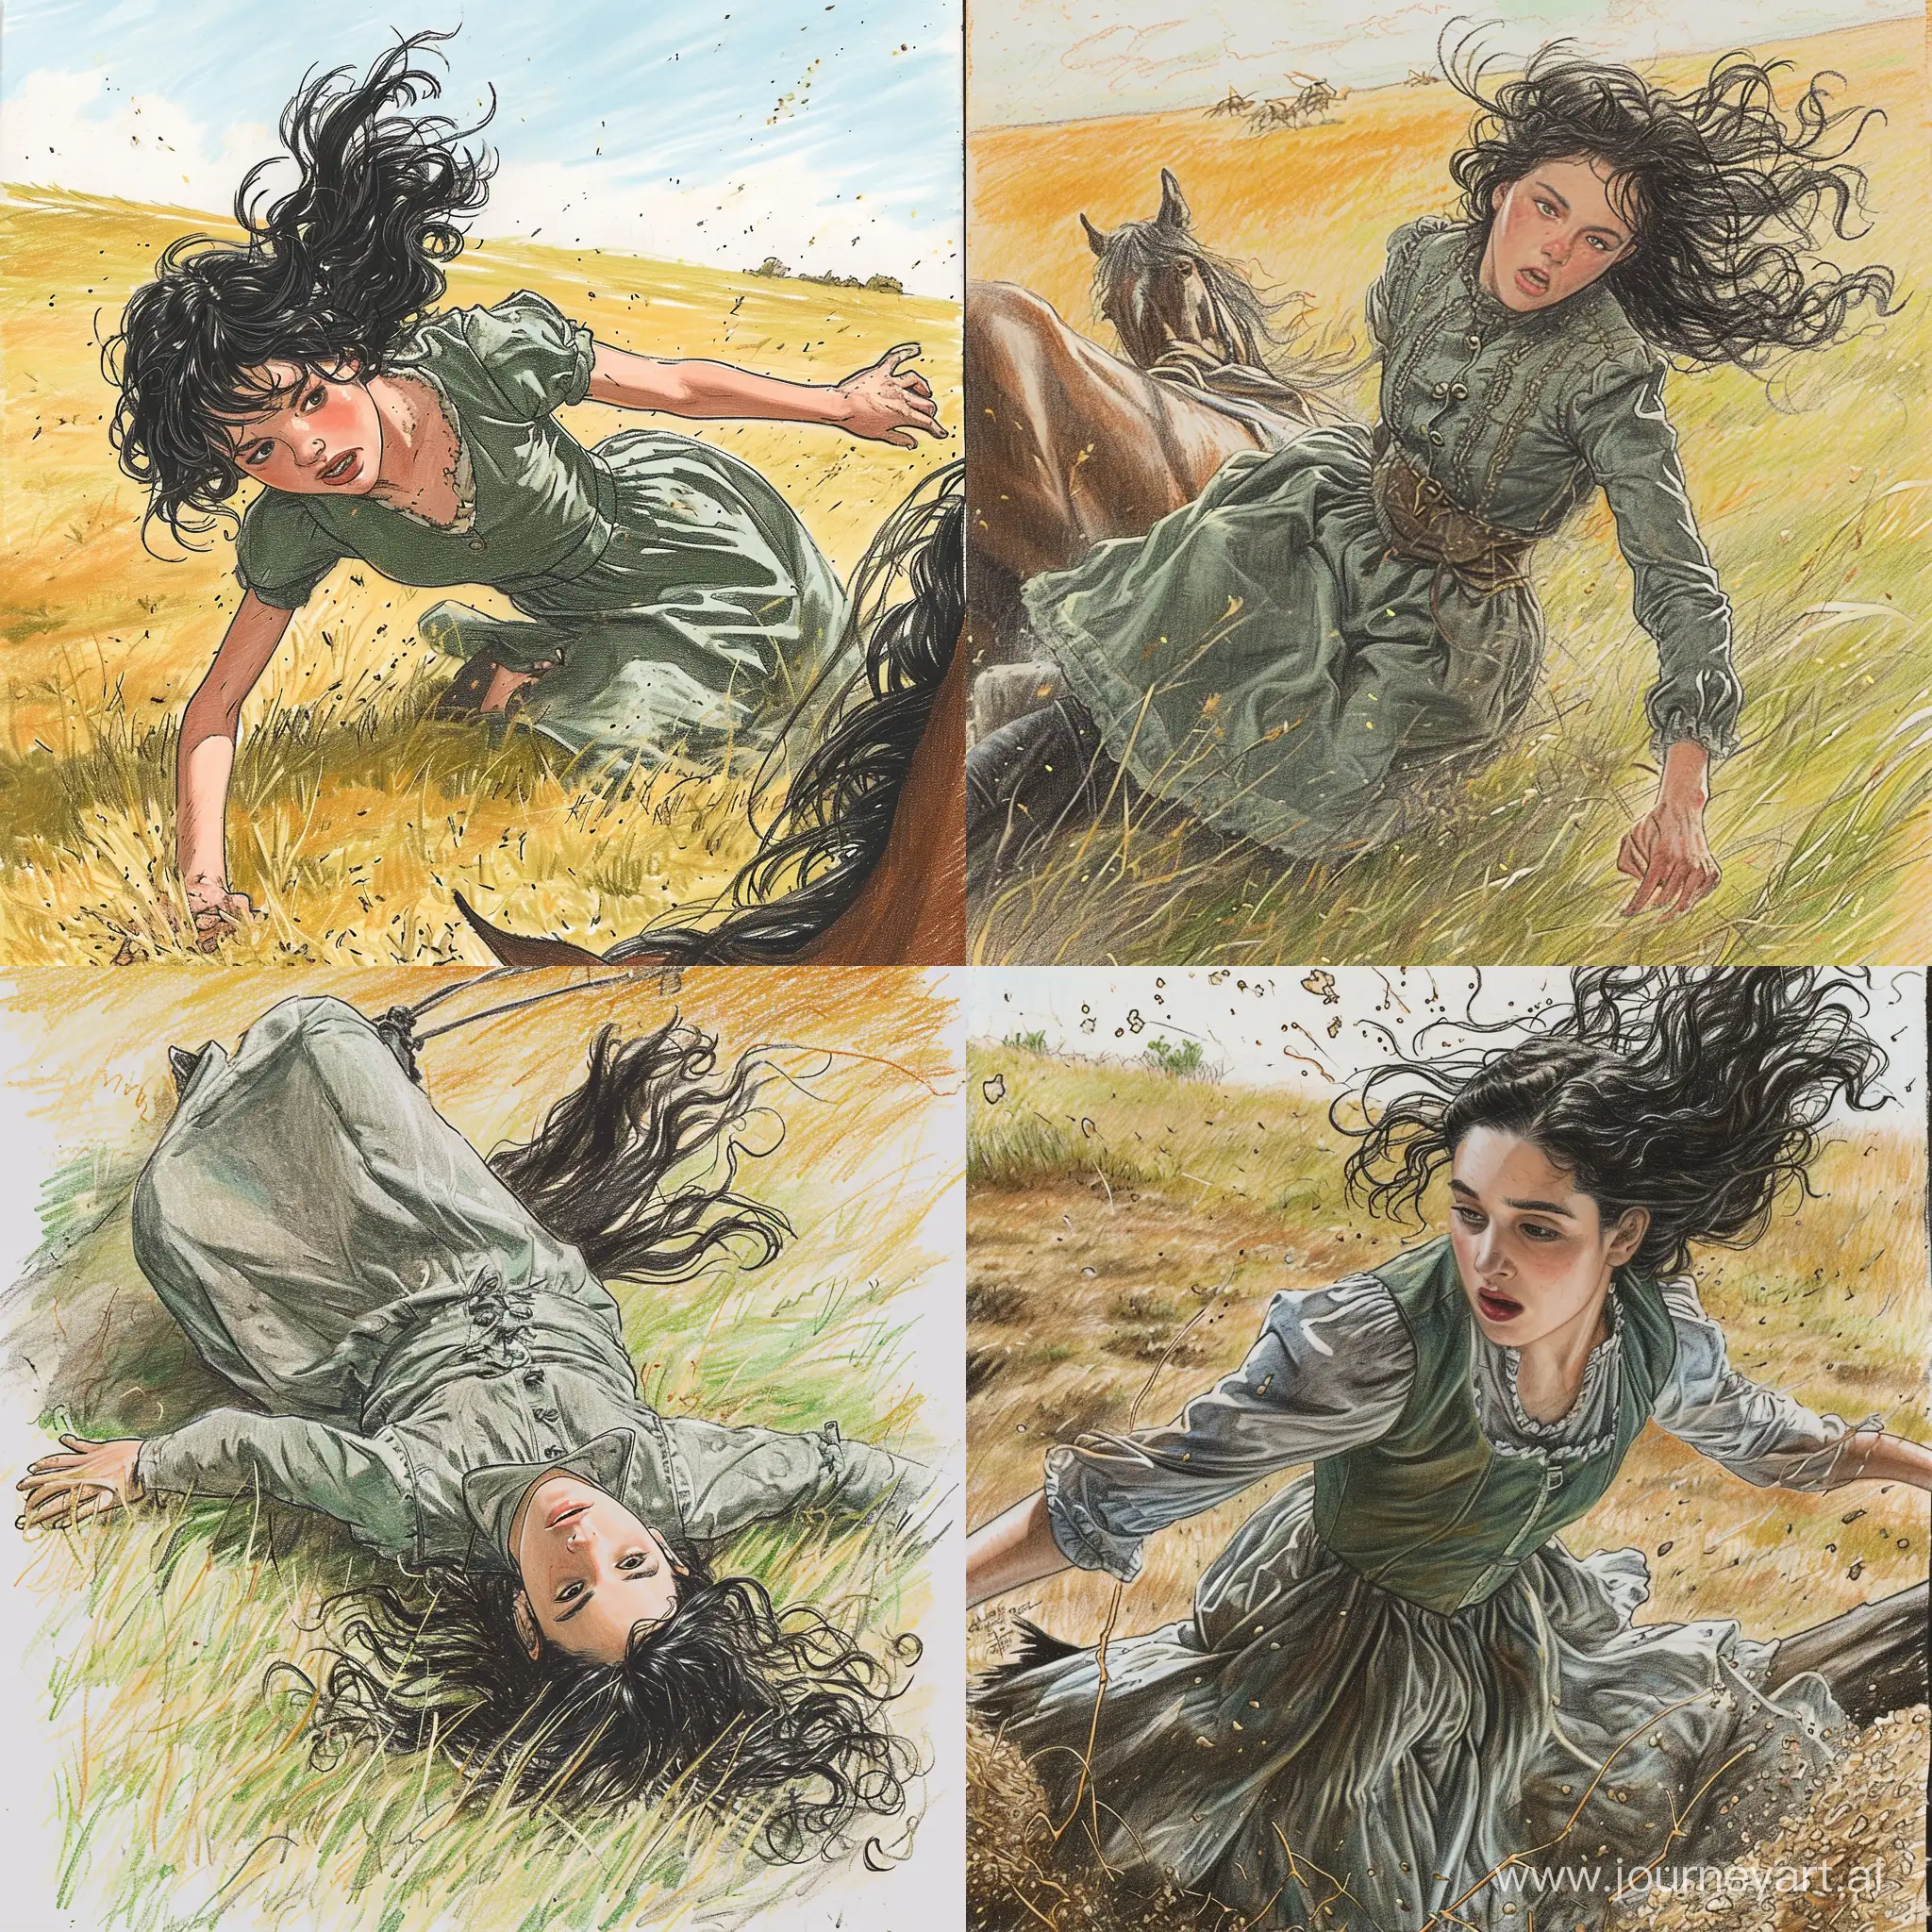 A teenage girl in a green-gray dress, with black wavy hair, falls from a horse, drawn in color pencil, sunny, a field of grass,She fell off her horse, the horse is clearly visible